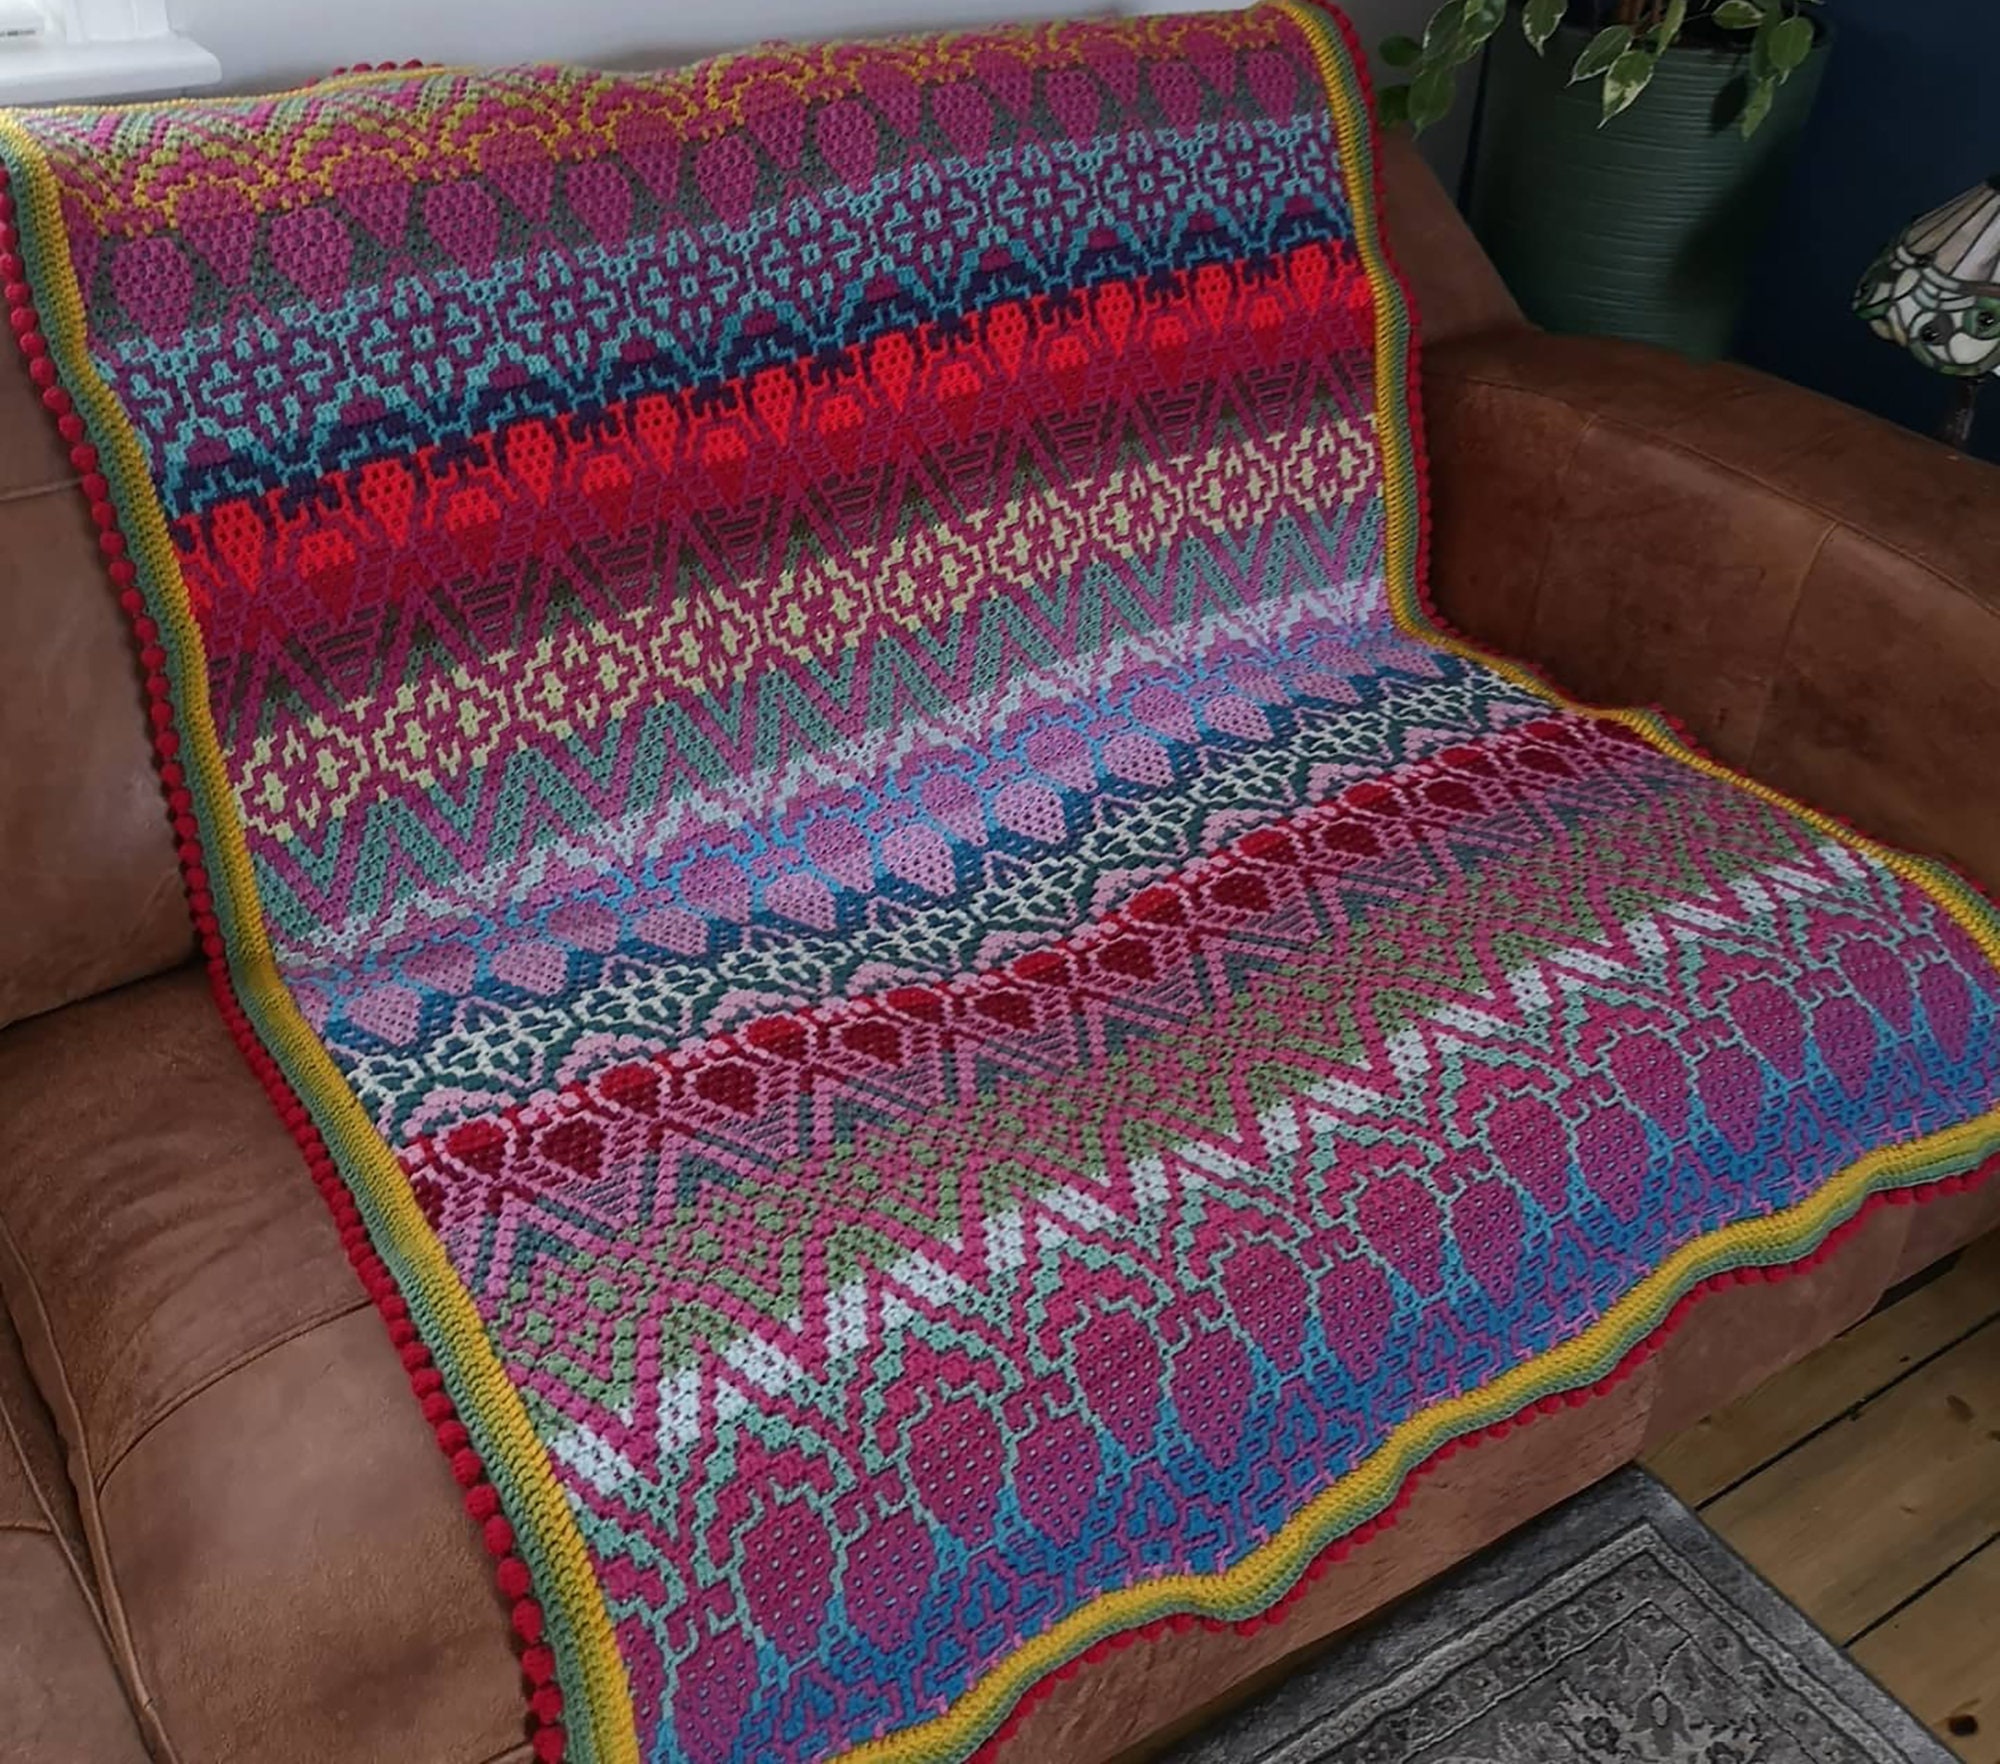 A Very Rainbow Blanket in mosaic crochet using the Scheepjes color pack : r/ crochet